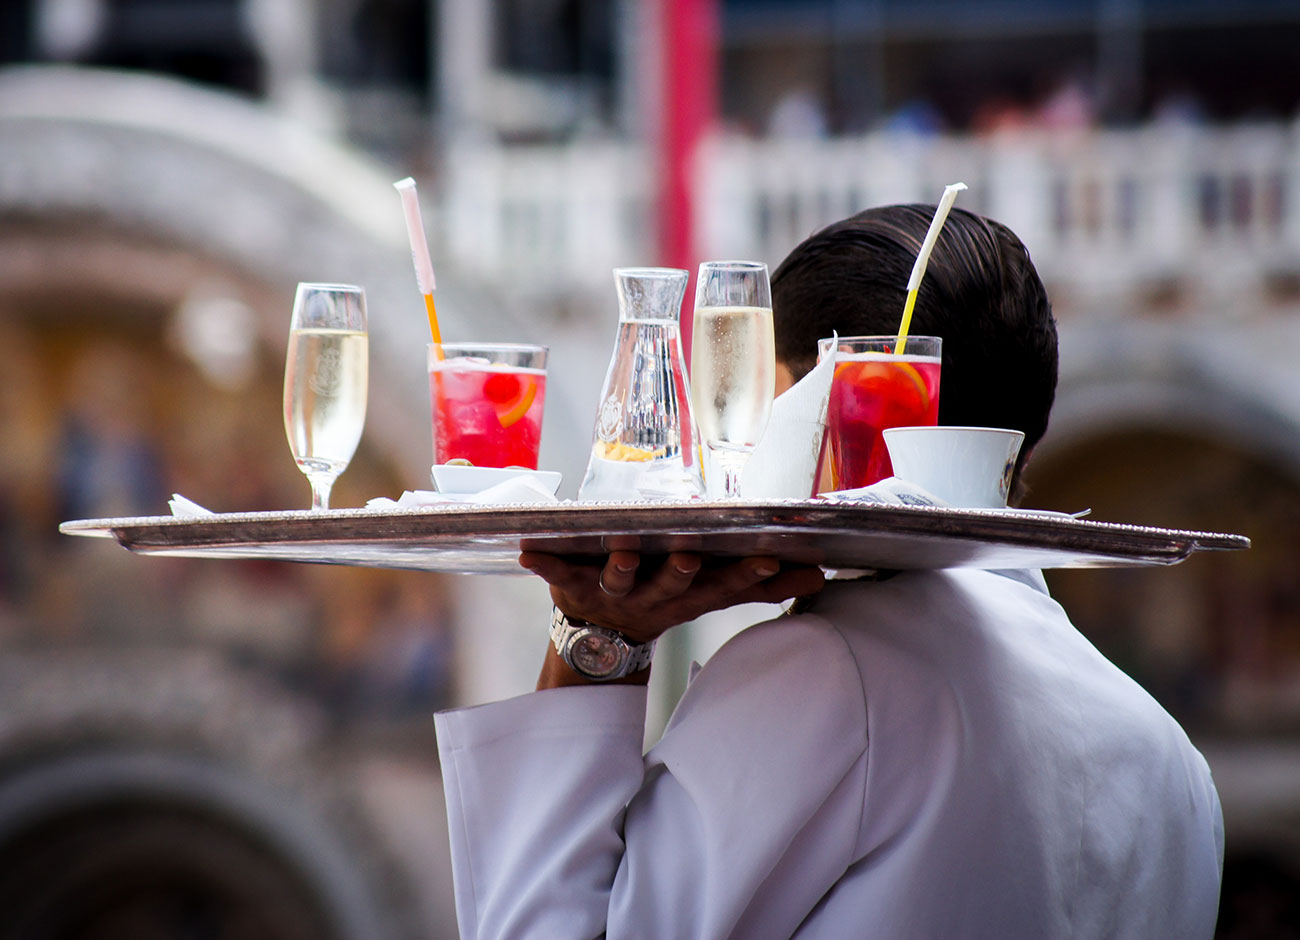 Waiter carrying tray of drinks